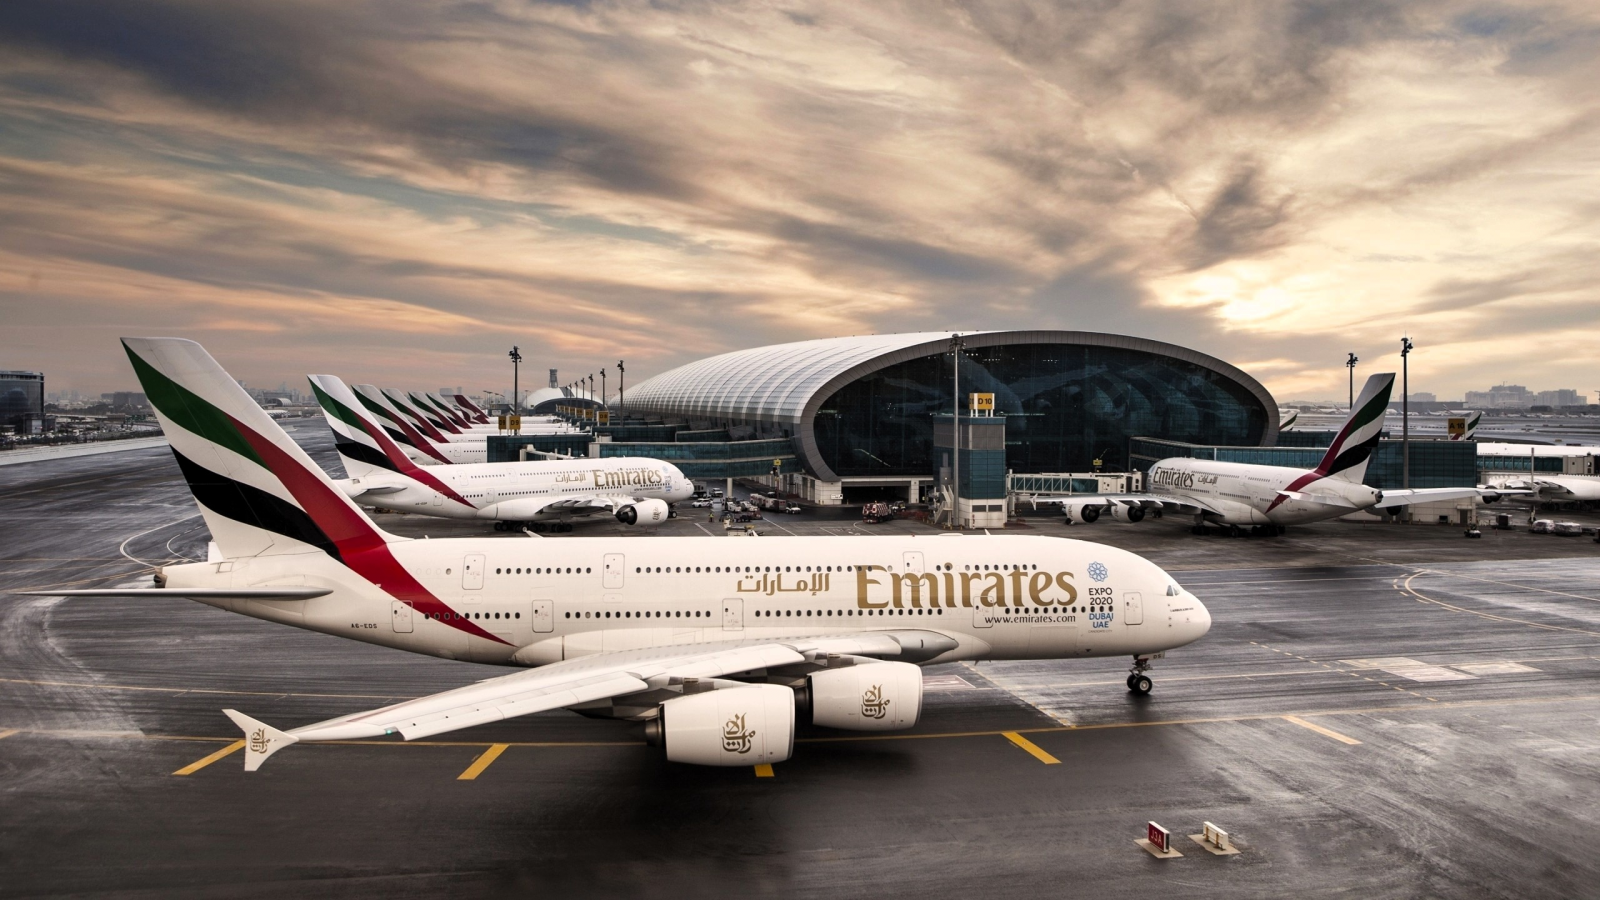 Airbus A380 at the airport in Dubai